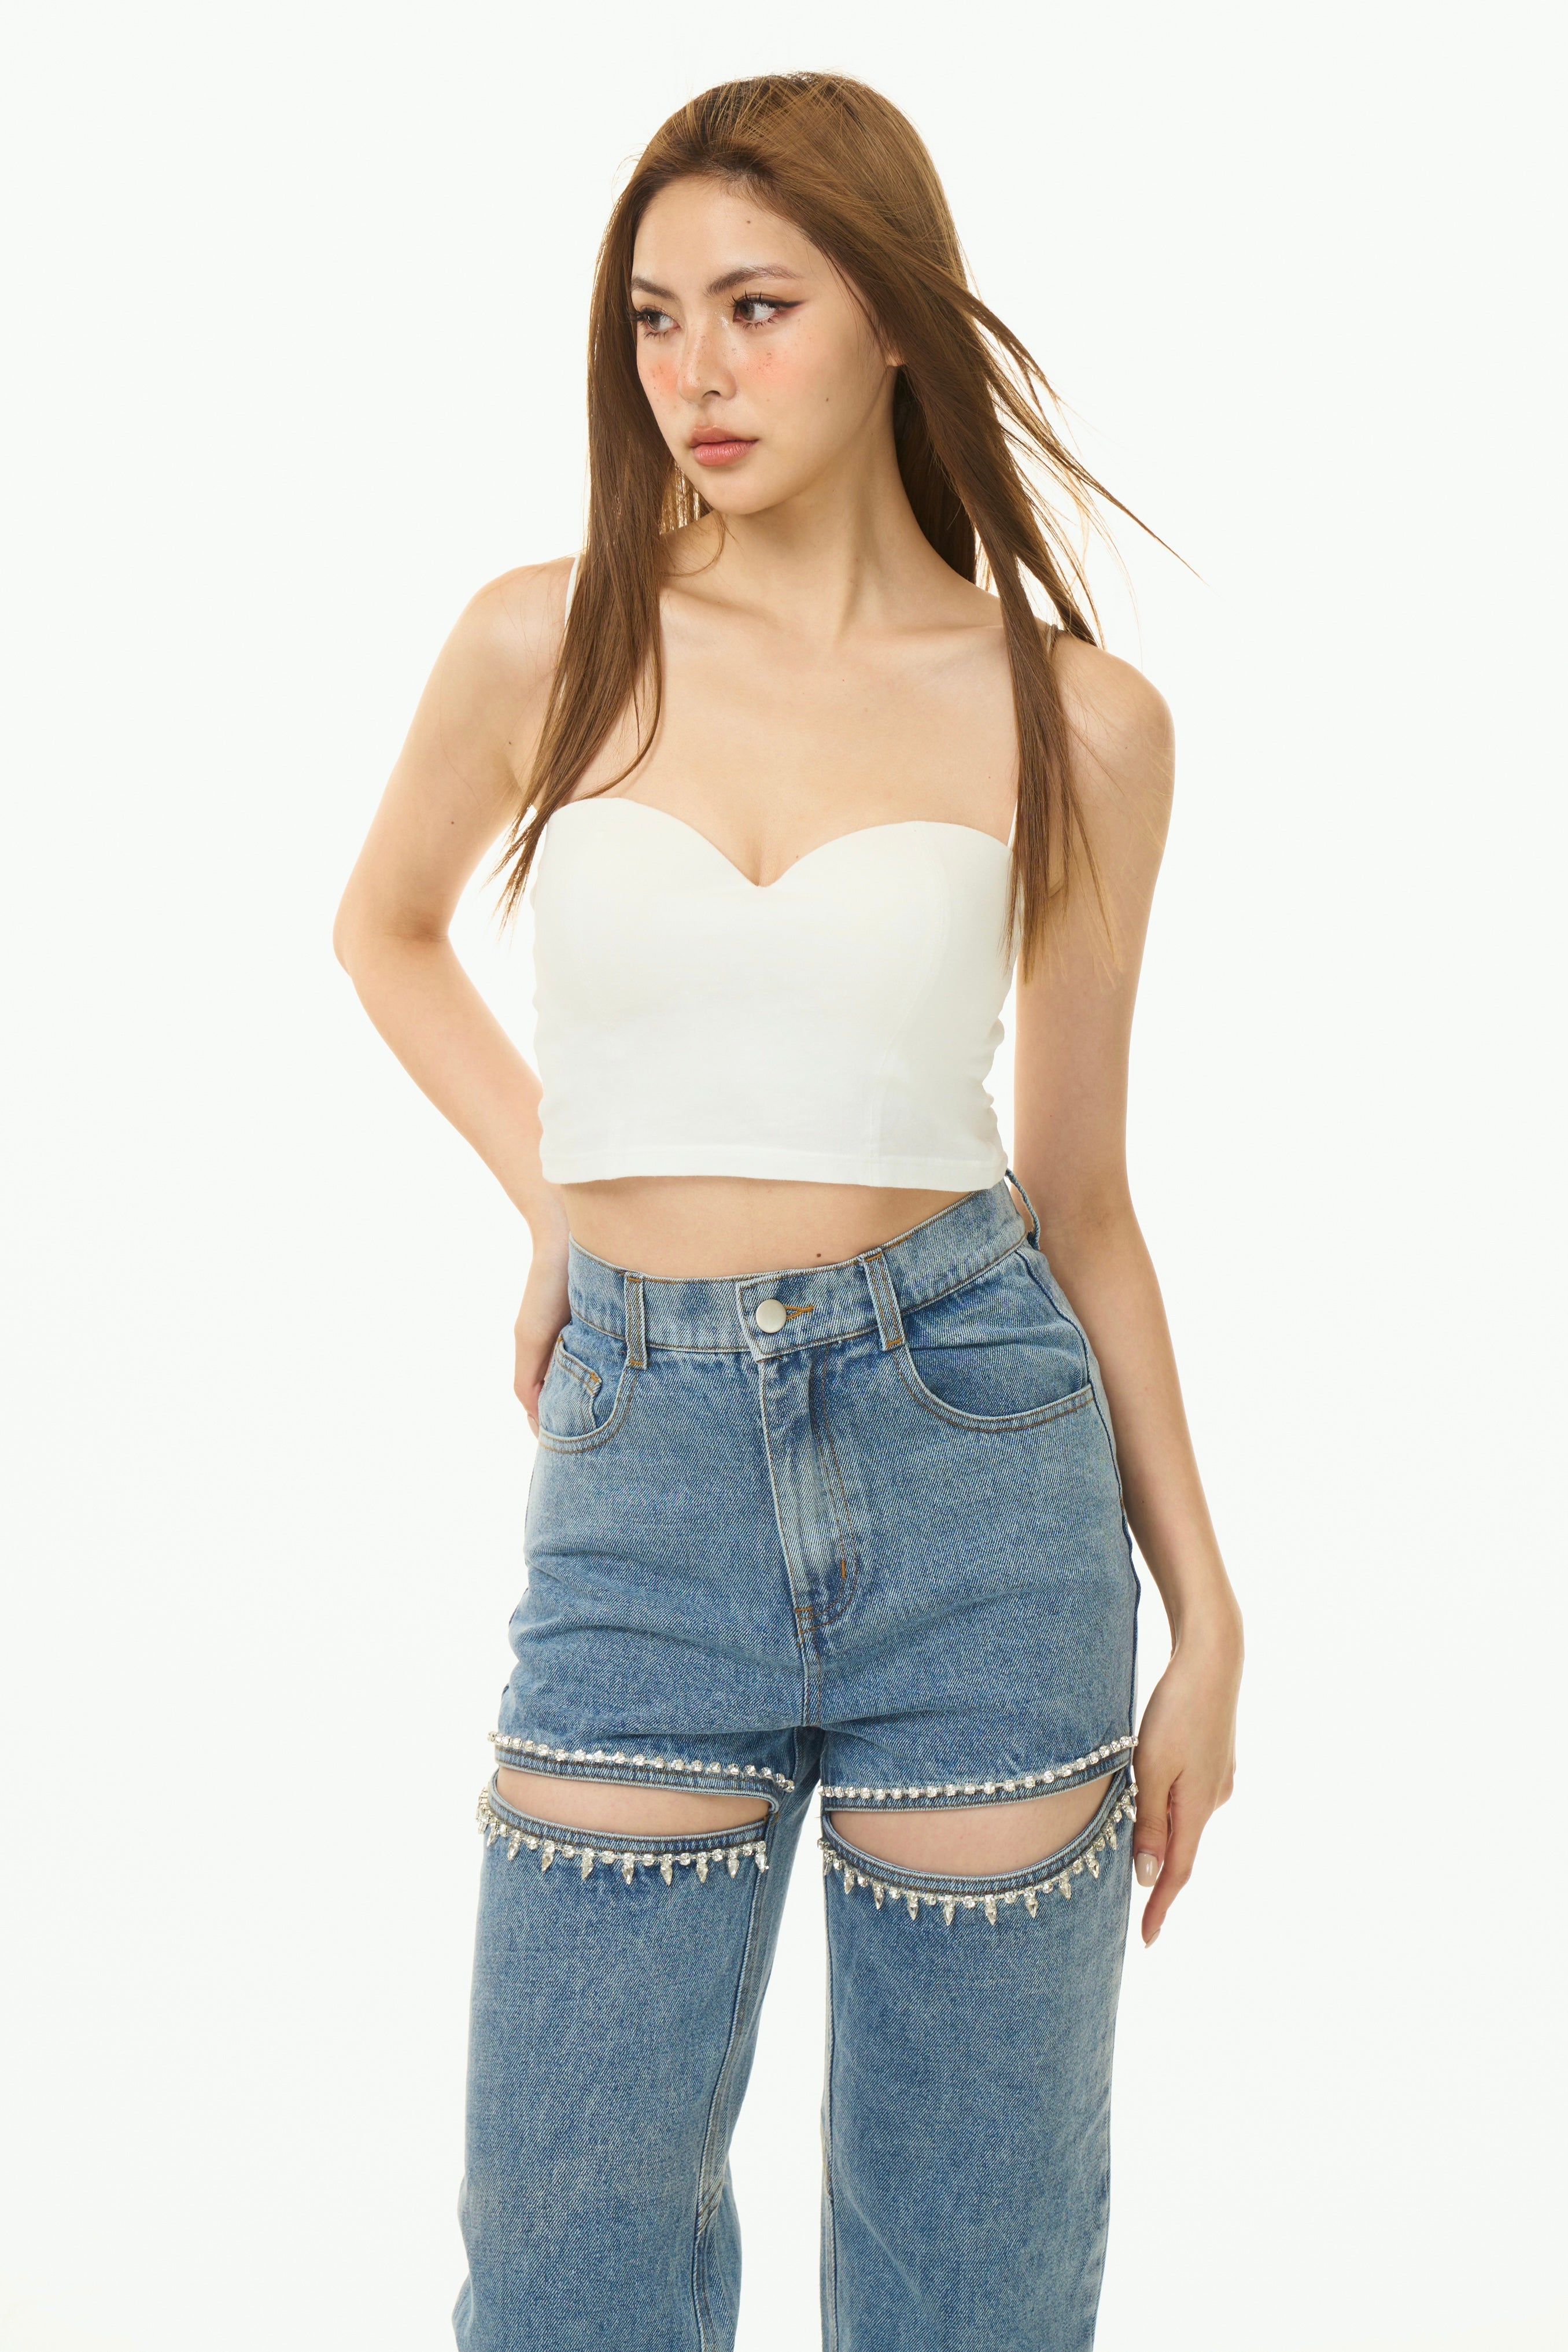 Shinny Cut-Out Jeans